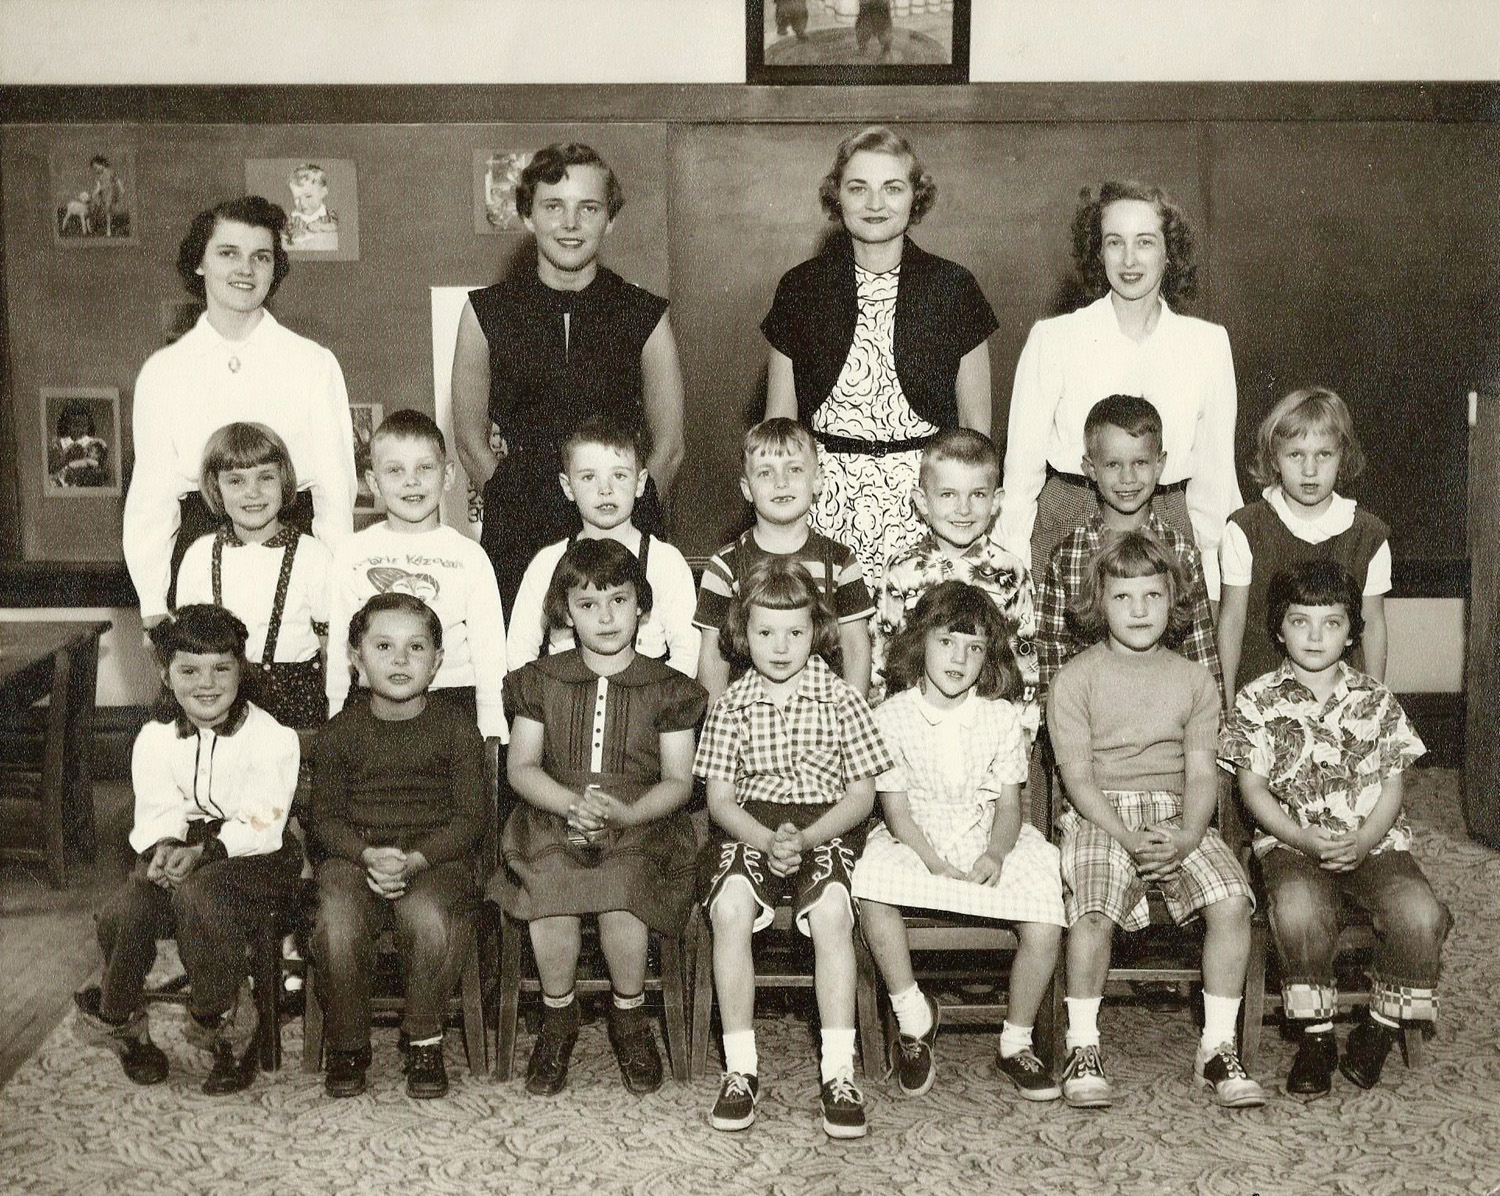 Wisconsin State College, River Falls Campus School Kindergarten Class. Yours truly third from right, second row. Behind me is our class supervisor, Miss Sara Garner, who to my 5 year-old eyes was the most beautiful woman on the planet. View full size.